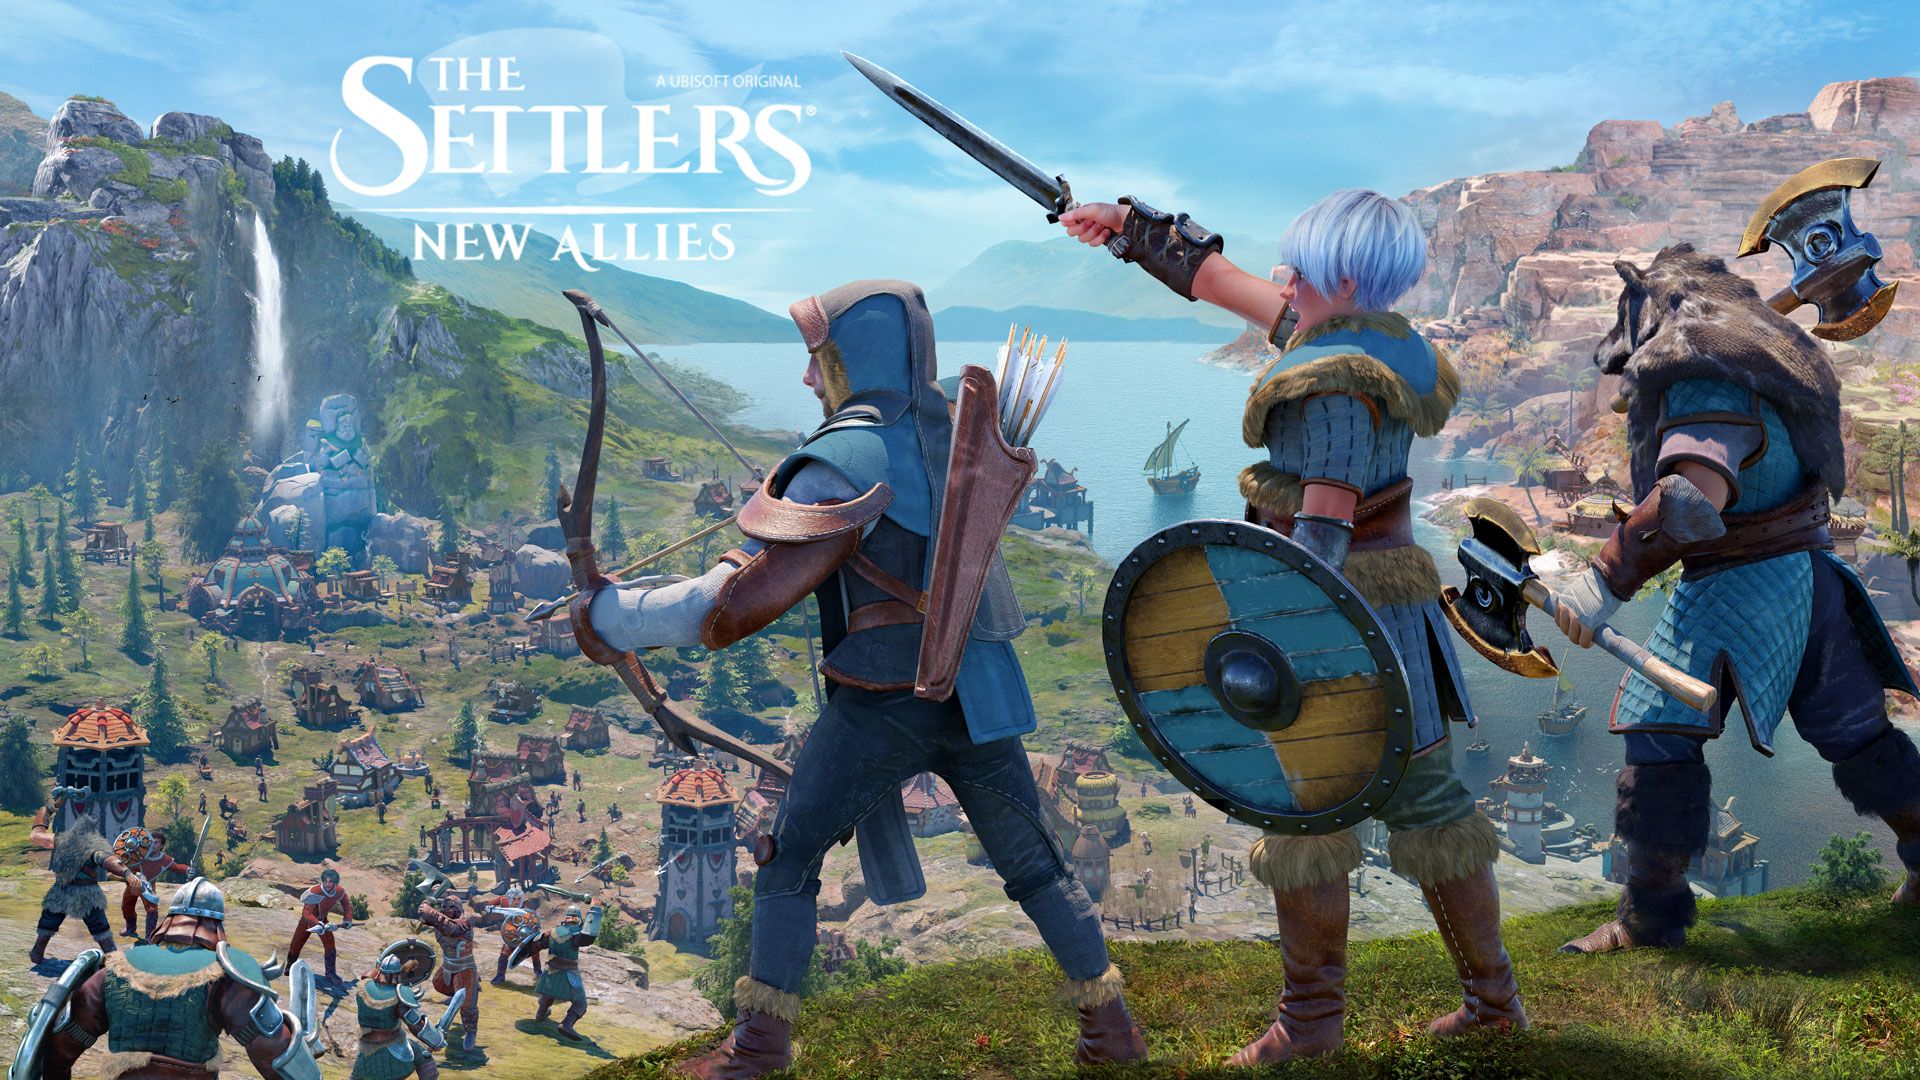 The Settlers: New Allies Launches on February 17th, 2023 for
PC